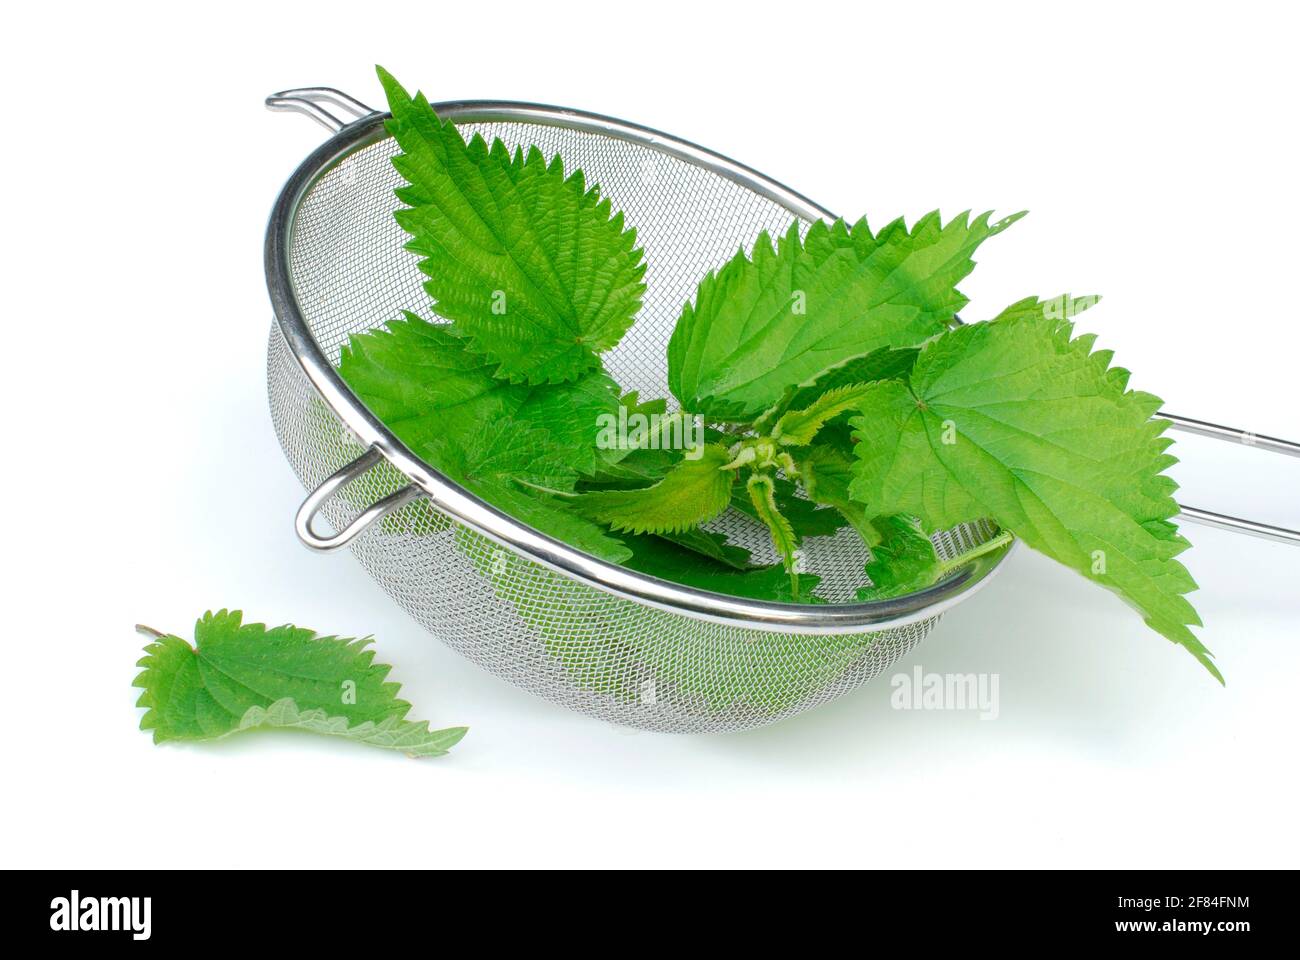 Large nettle (Urtica dioica) , nettle leaves in sieve Stock Photo